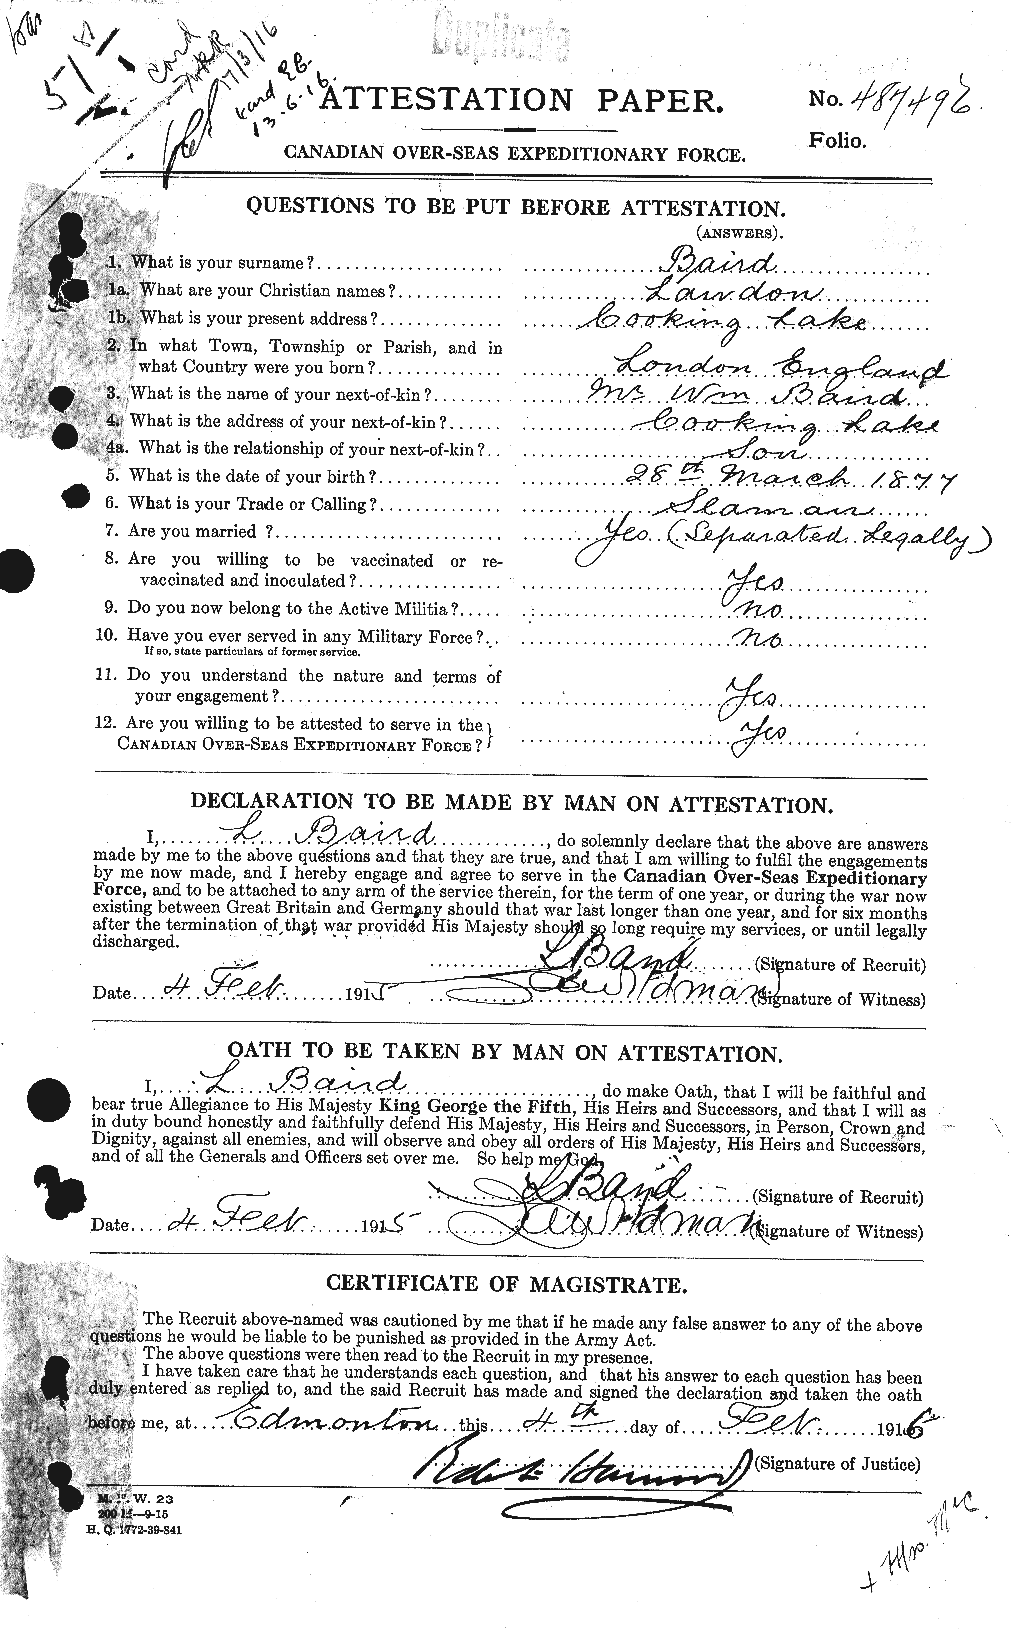 Personnel Records of the First World War - CEF 226596a